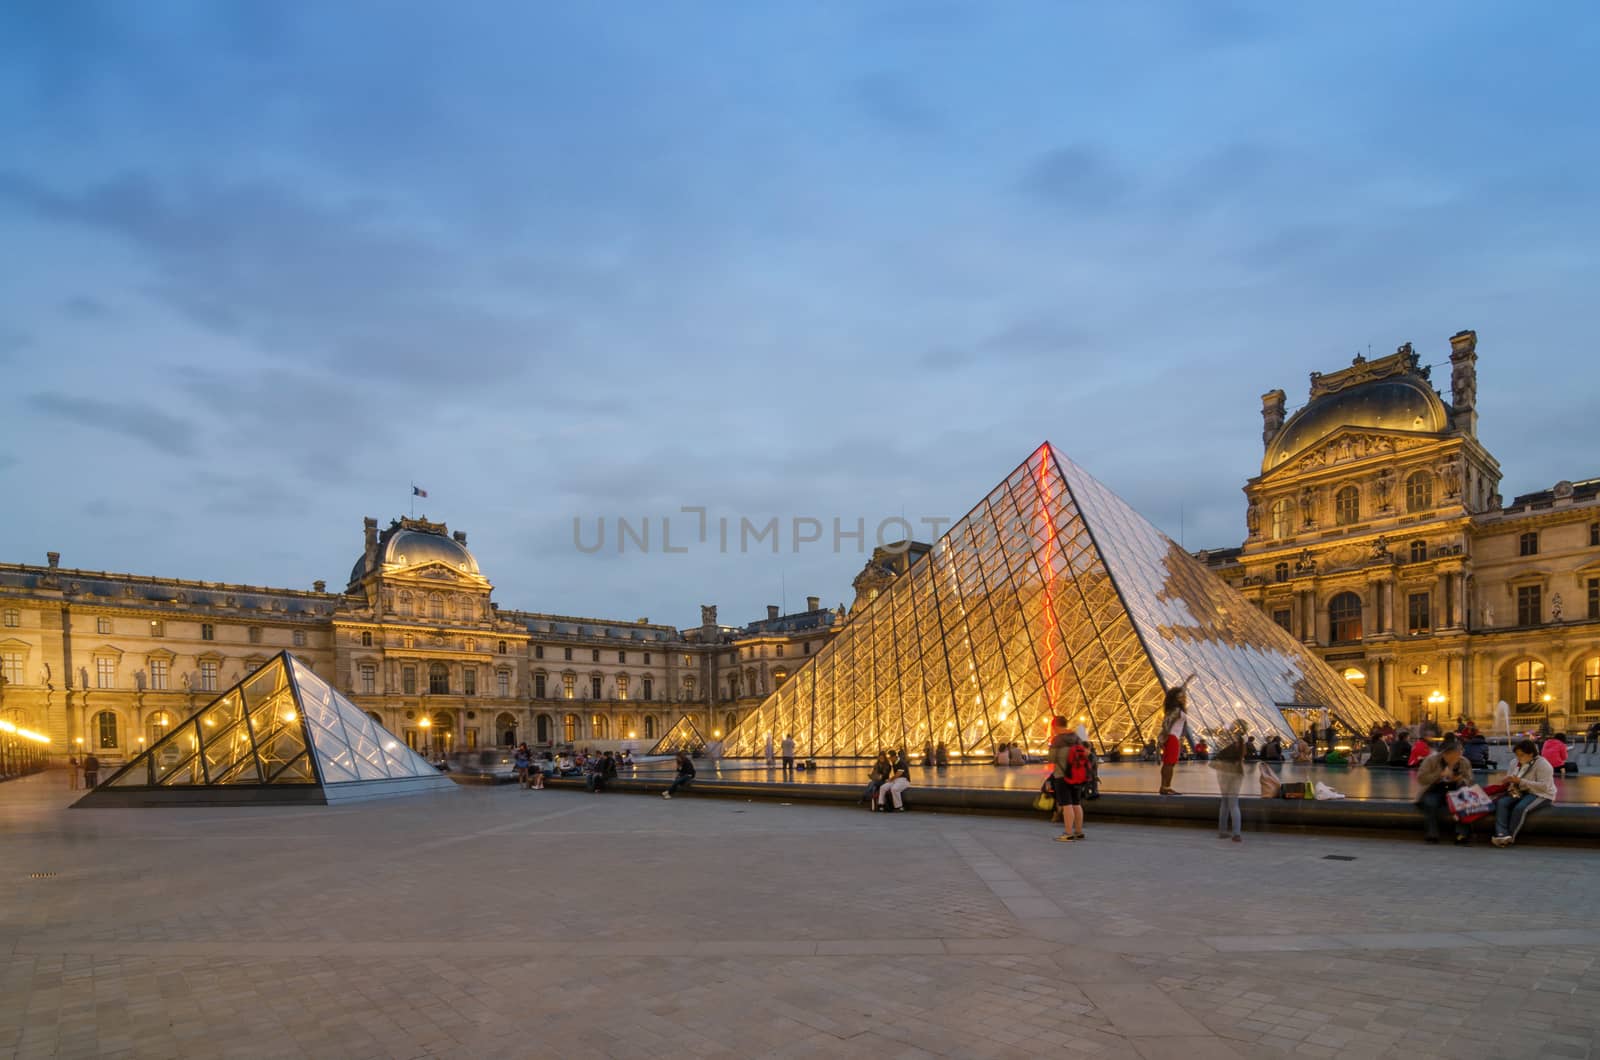 Paris, France - May 14, 2015: Tourists visiting Louvre museum in Paris by siraanamwong